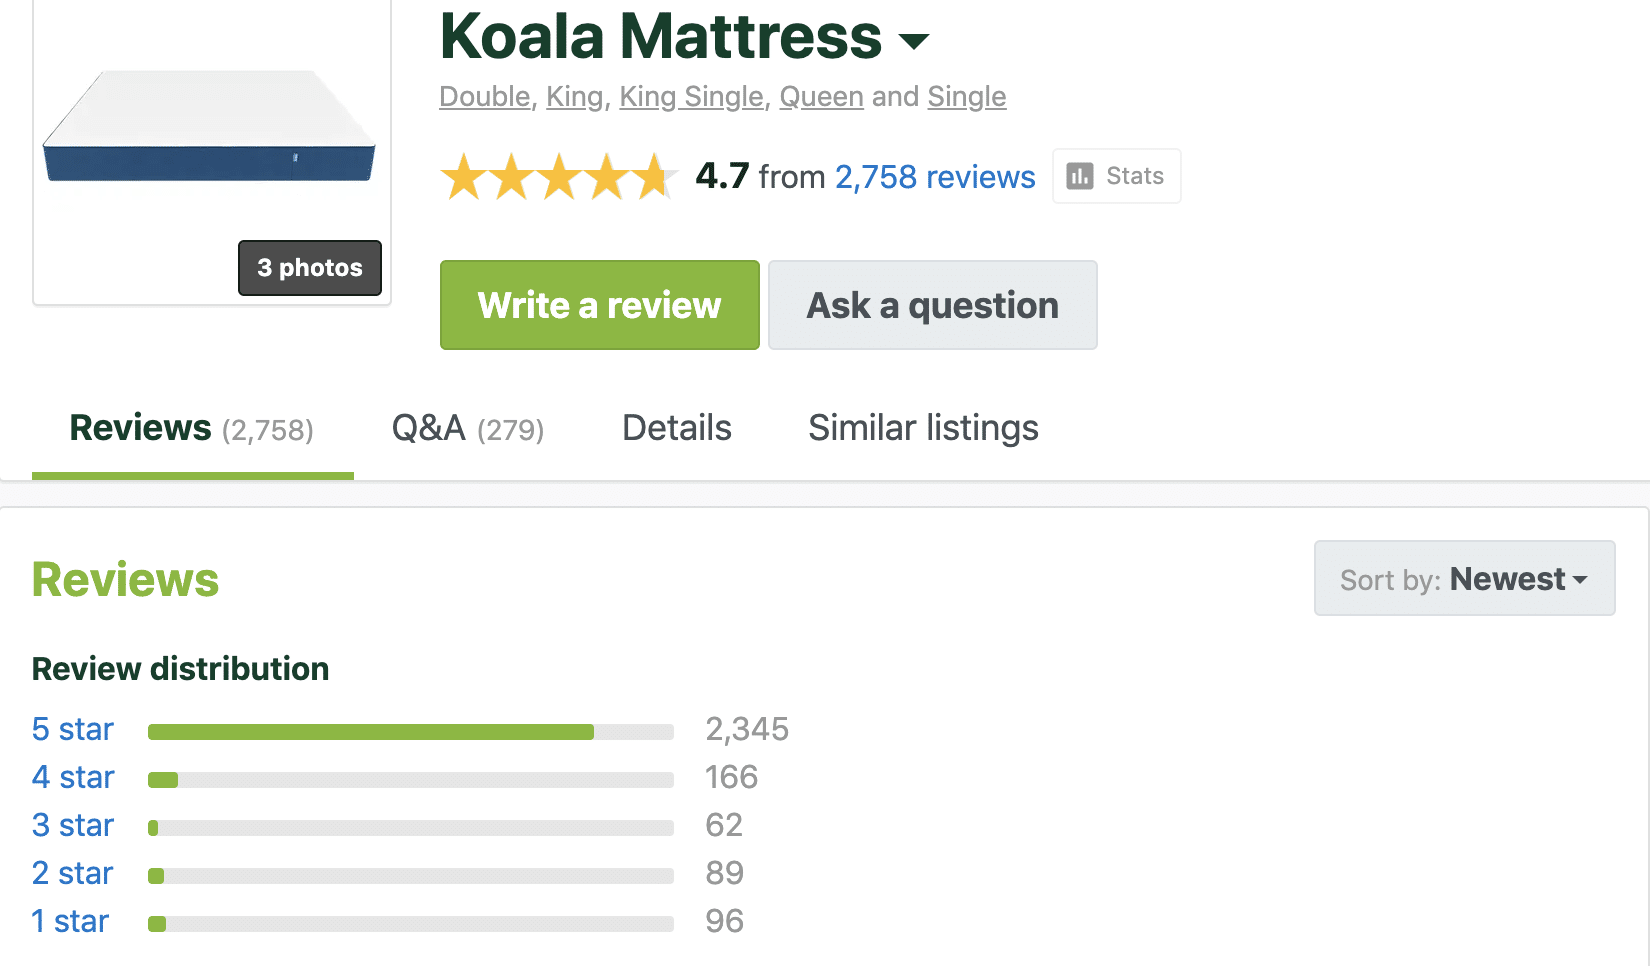 Can we trust customer reviews